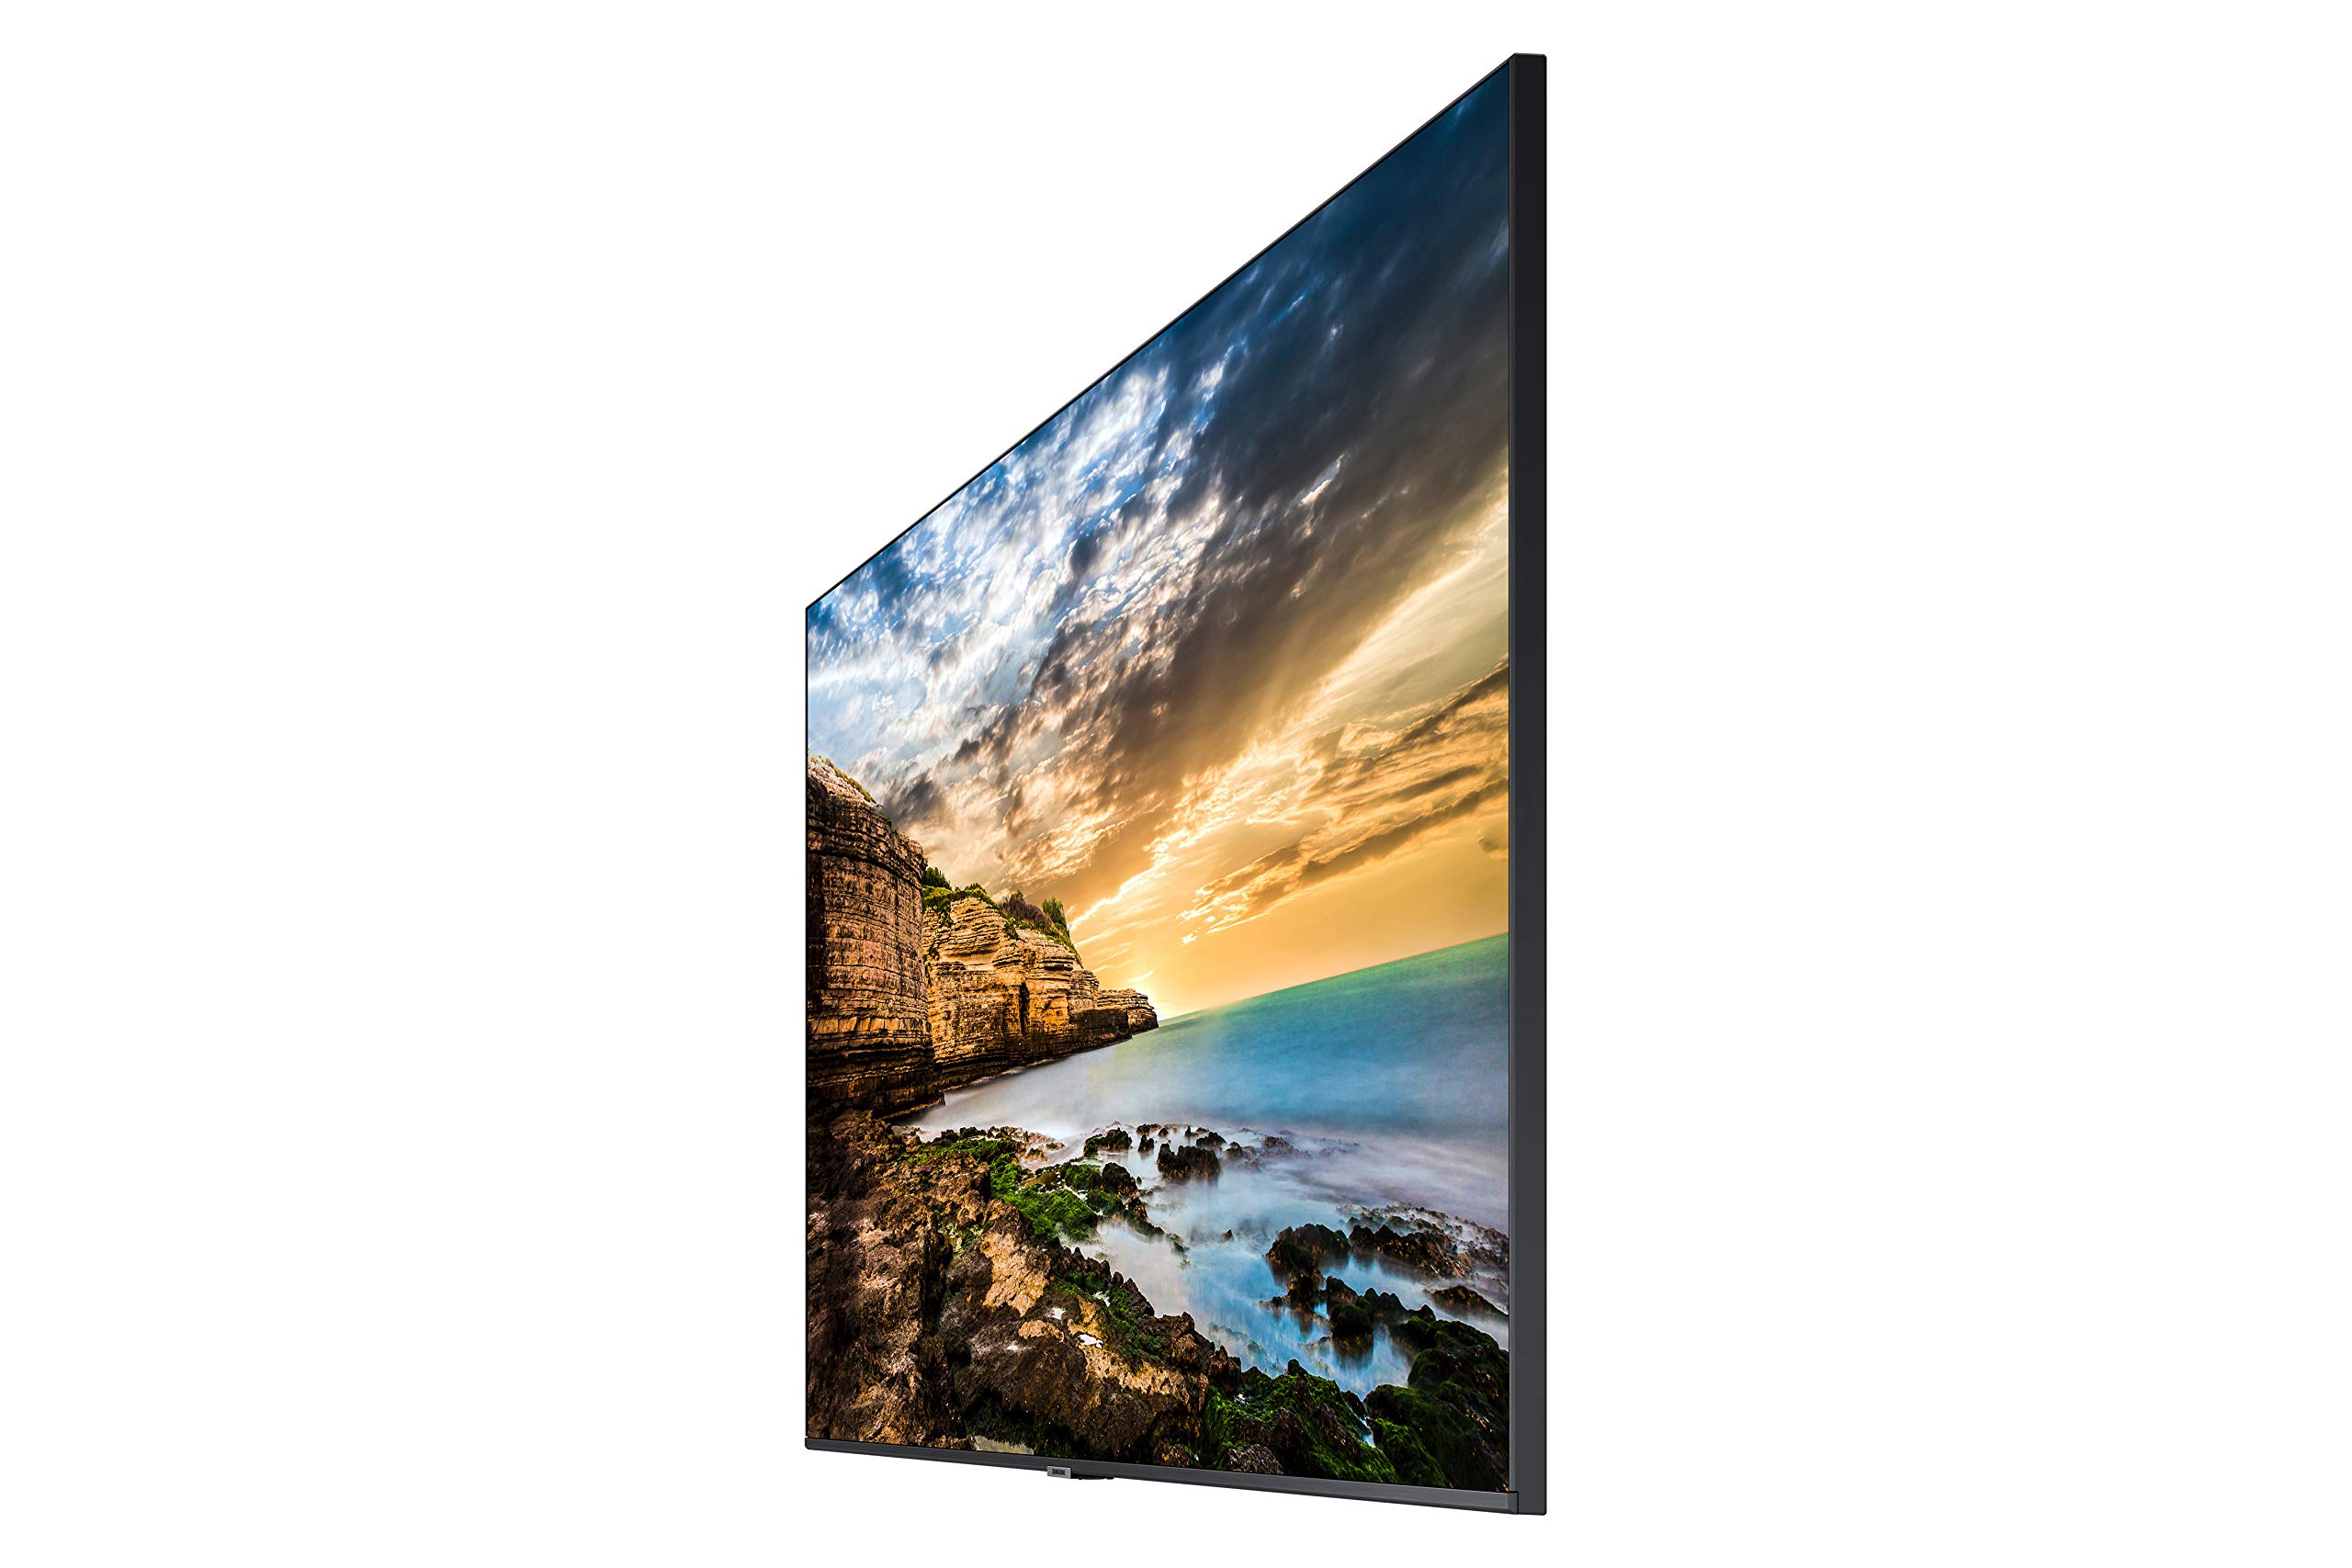 SAMSUNG Business QE55T 55-inch 4K UHD 3840x2160 LED Commercial Signage Display, HDMI, USB, Speakers, 3-Yr Warranty, 16/7 Operation, 300 nit (LH55QETELGCXGO), Black